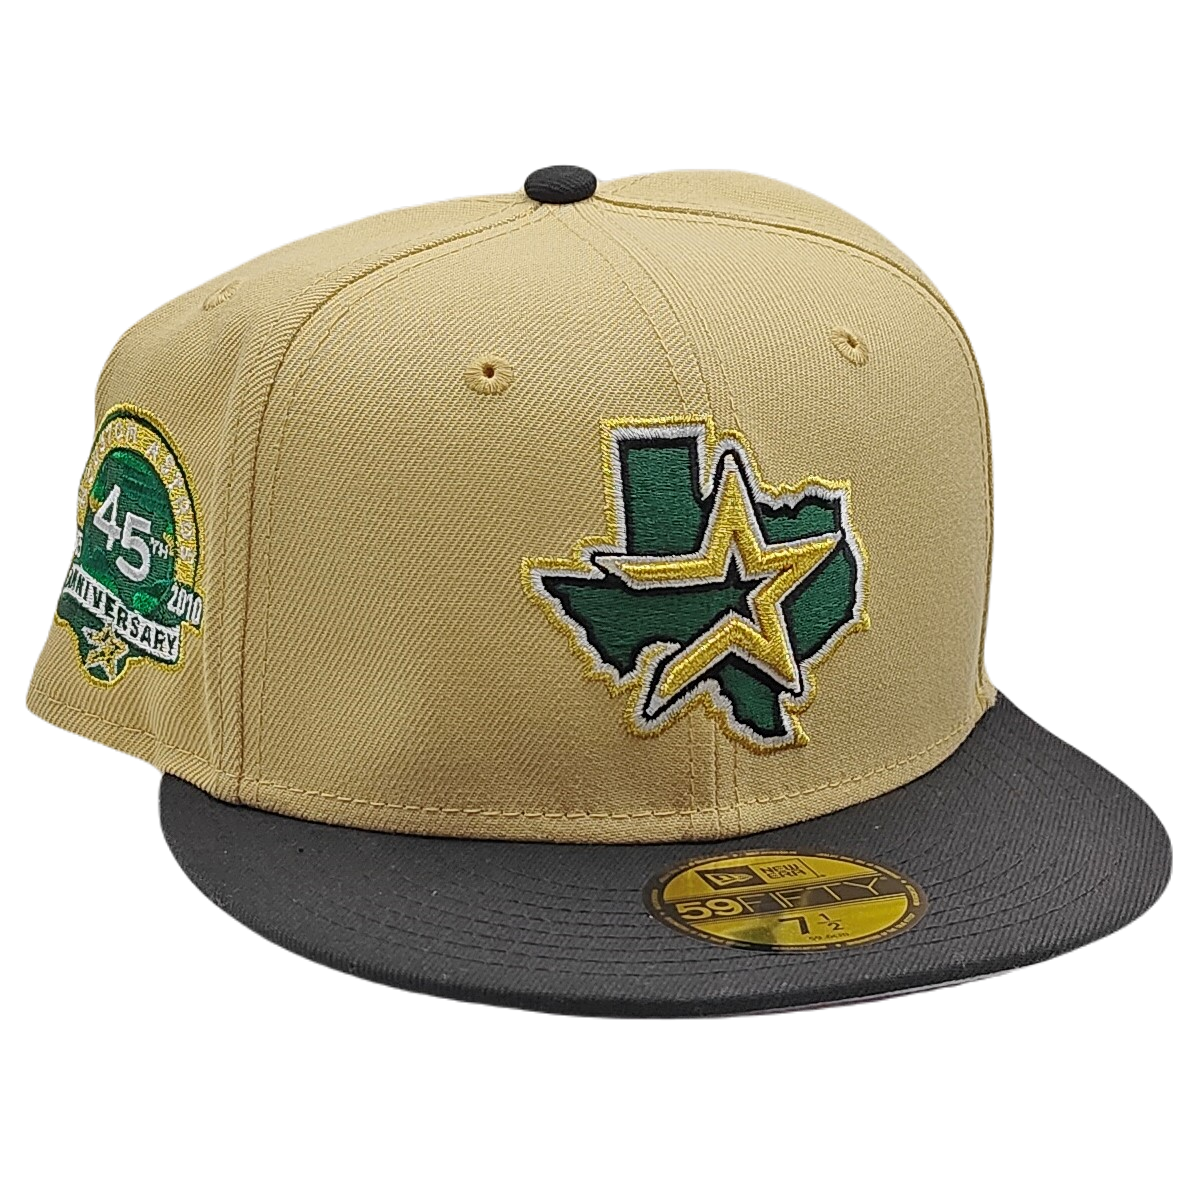 New Era Men's New Era White/Brown Houston Astros 50th Team Anniversary  59FIFTY Fitted Hat